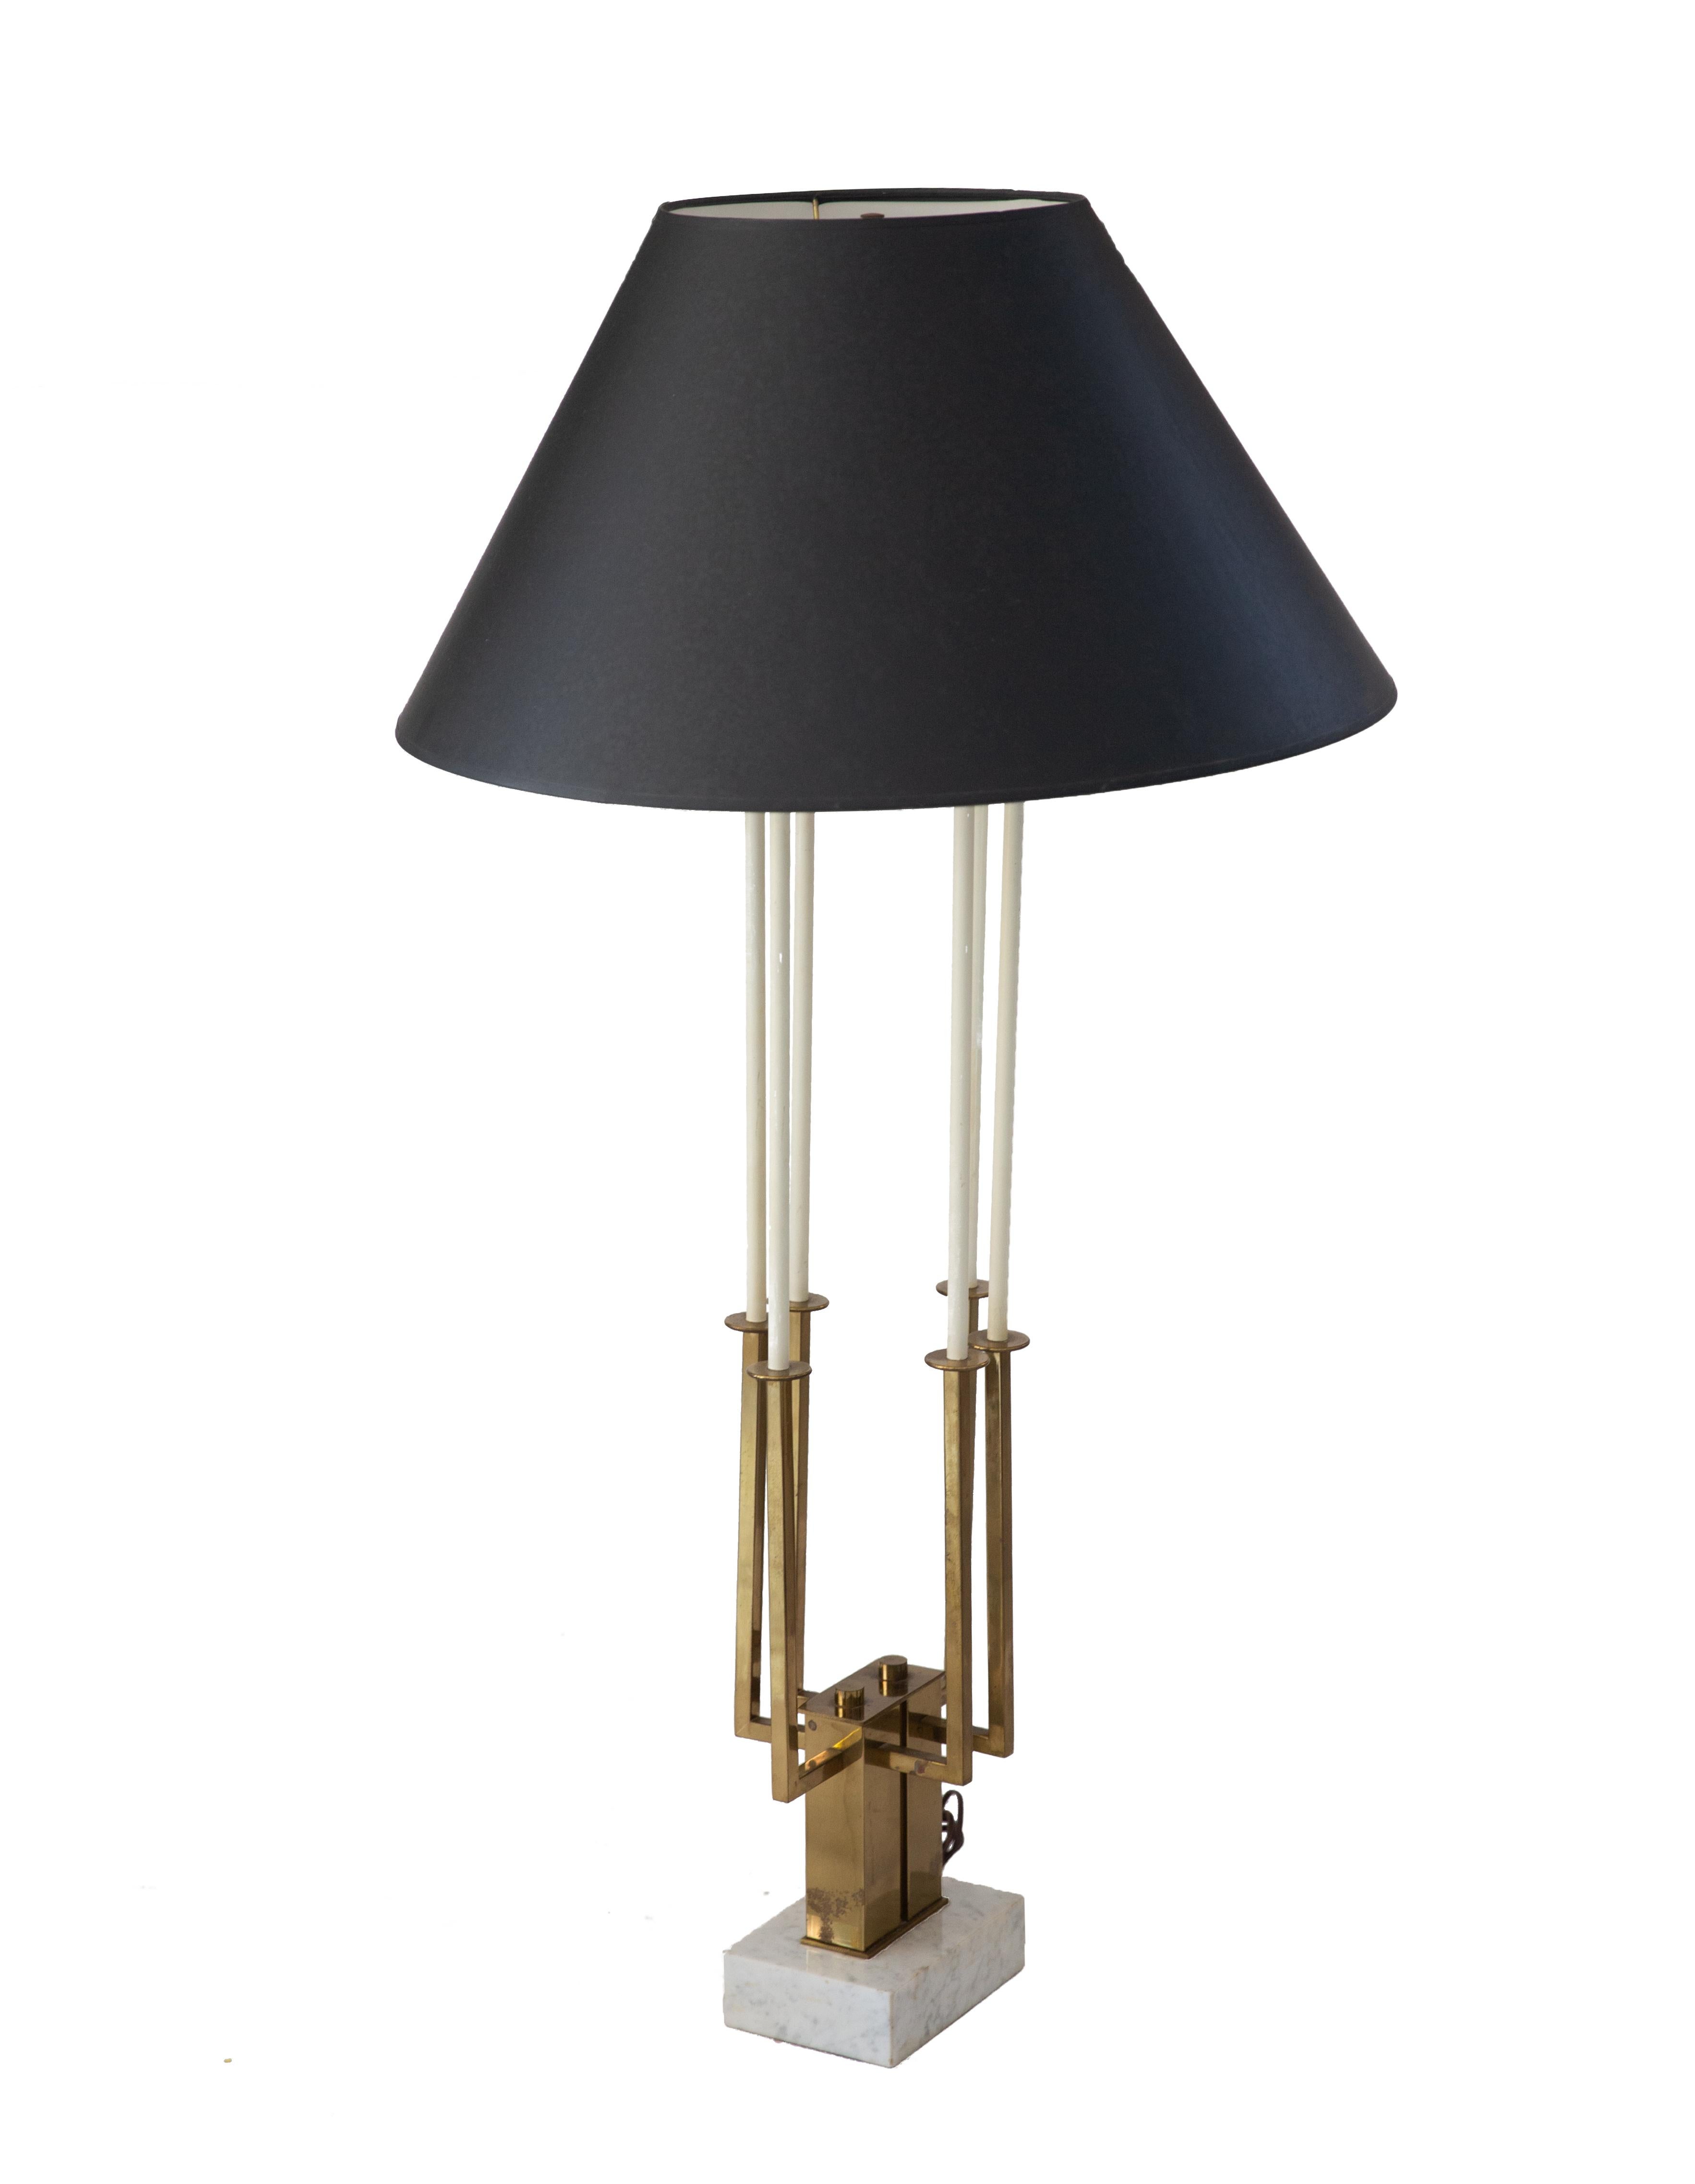 Tommi Parzinger designed tall lamp for Stiffel. The lamp is made of Brass and Marble and measures 44